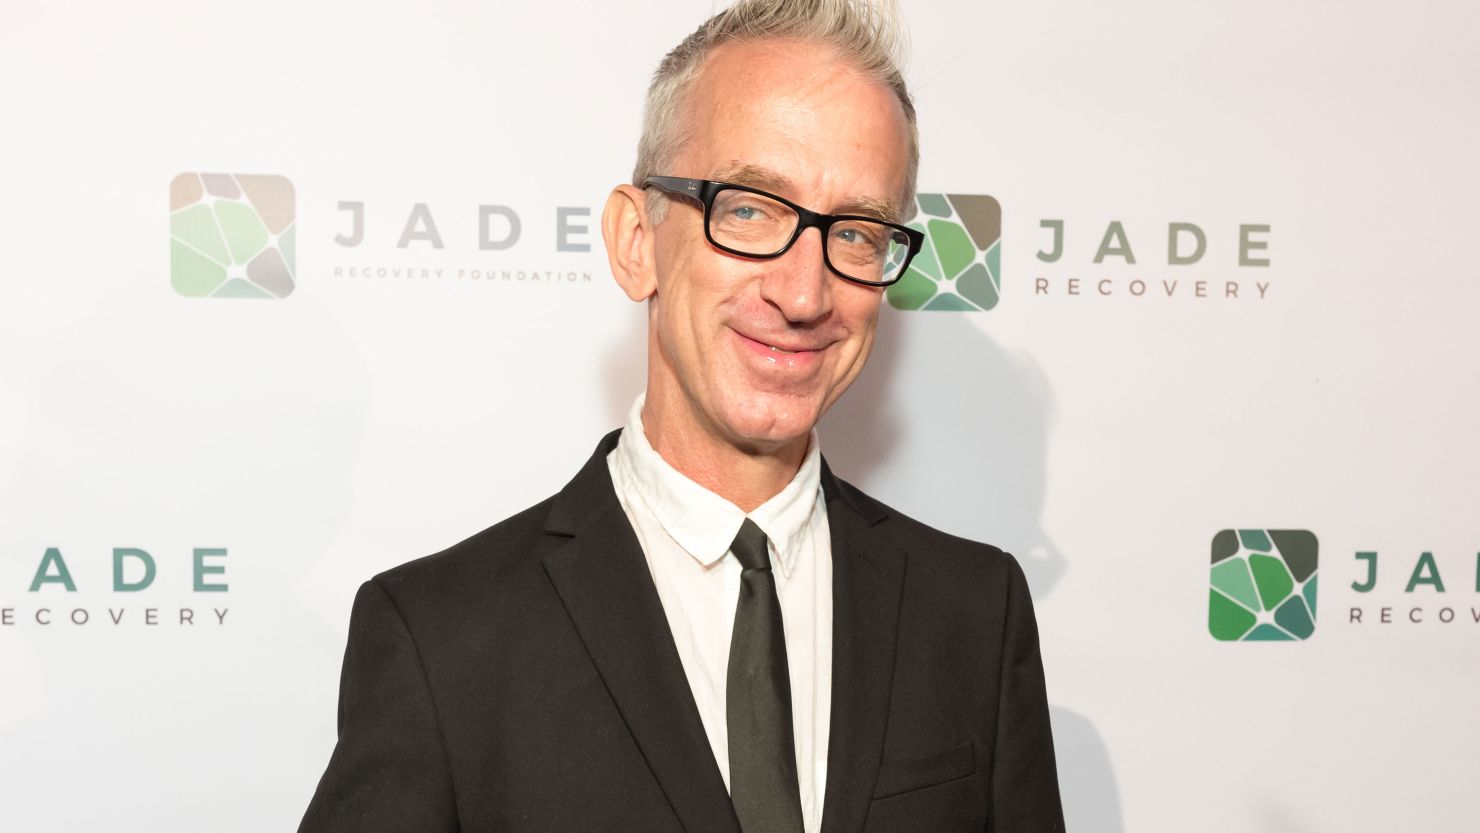 An arrest has been made in a possible assault case against Andy Dick. (Photo by Greg Doherty/Getty Images for Jade Recovery)